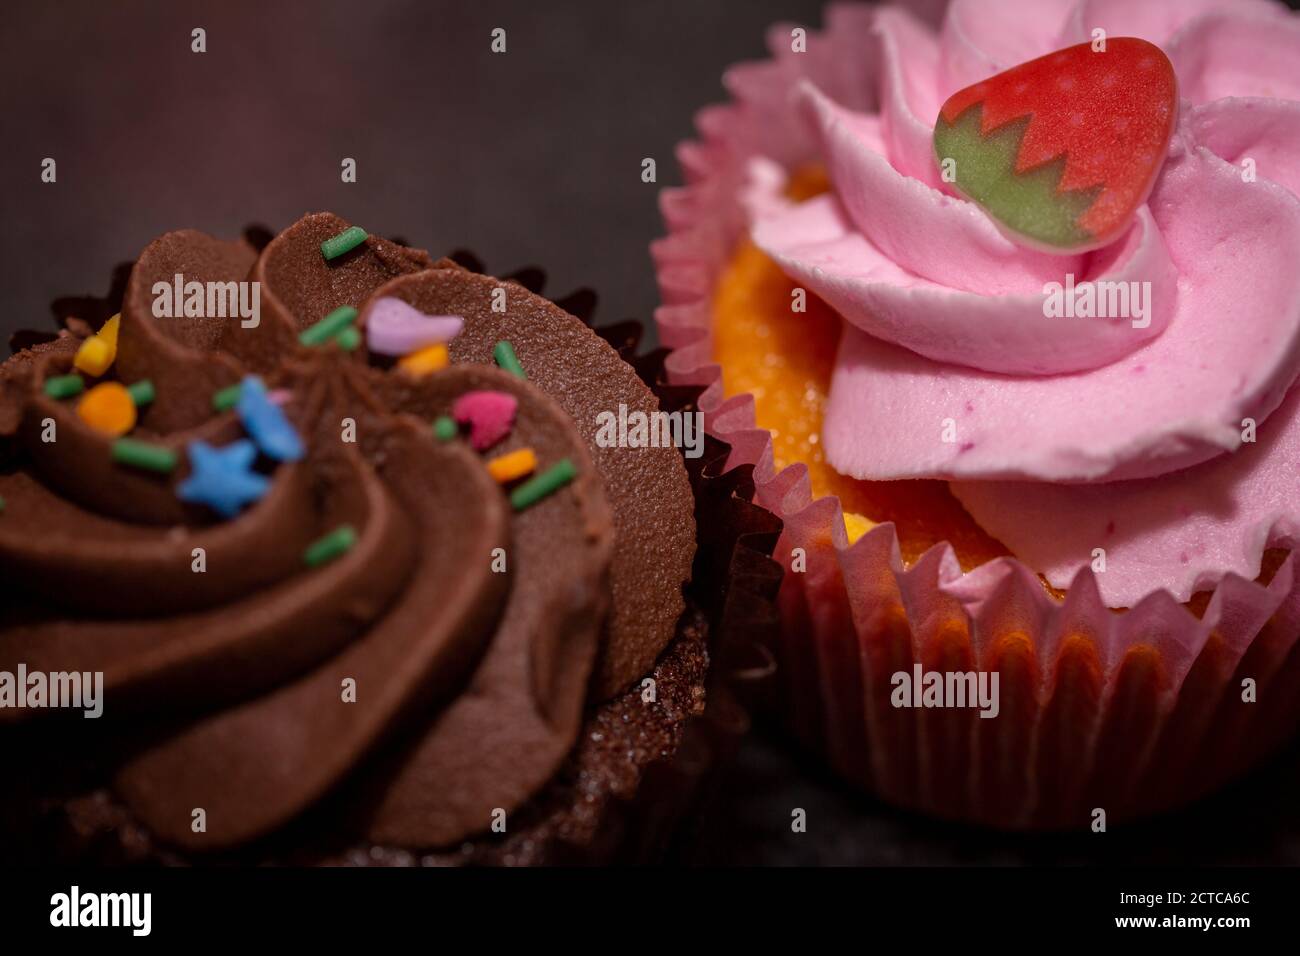 a close up of a chocolate and strawberry cupcake side by side shot using selective focus Stock Photo